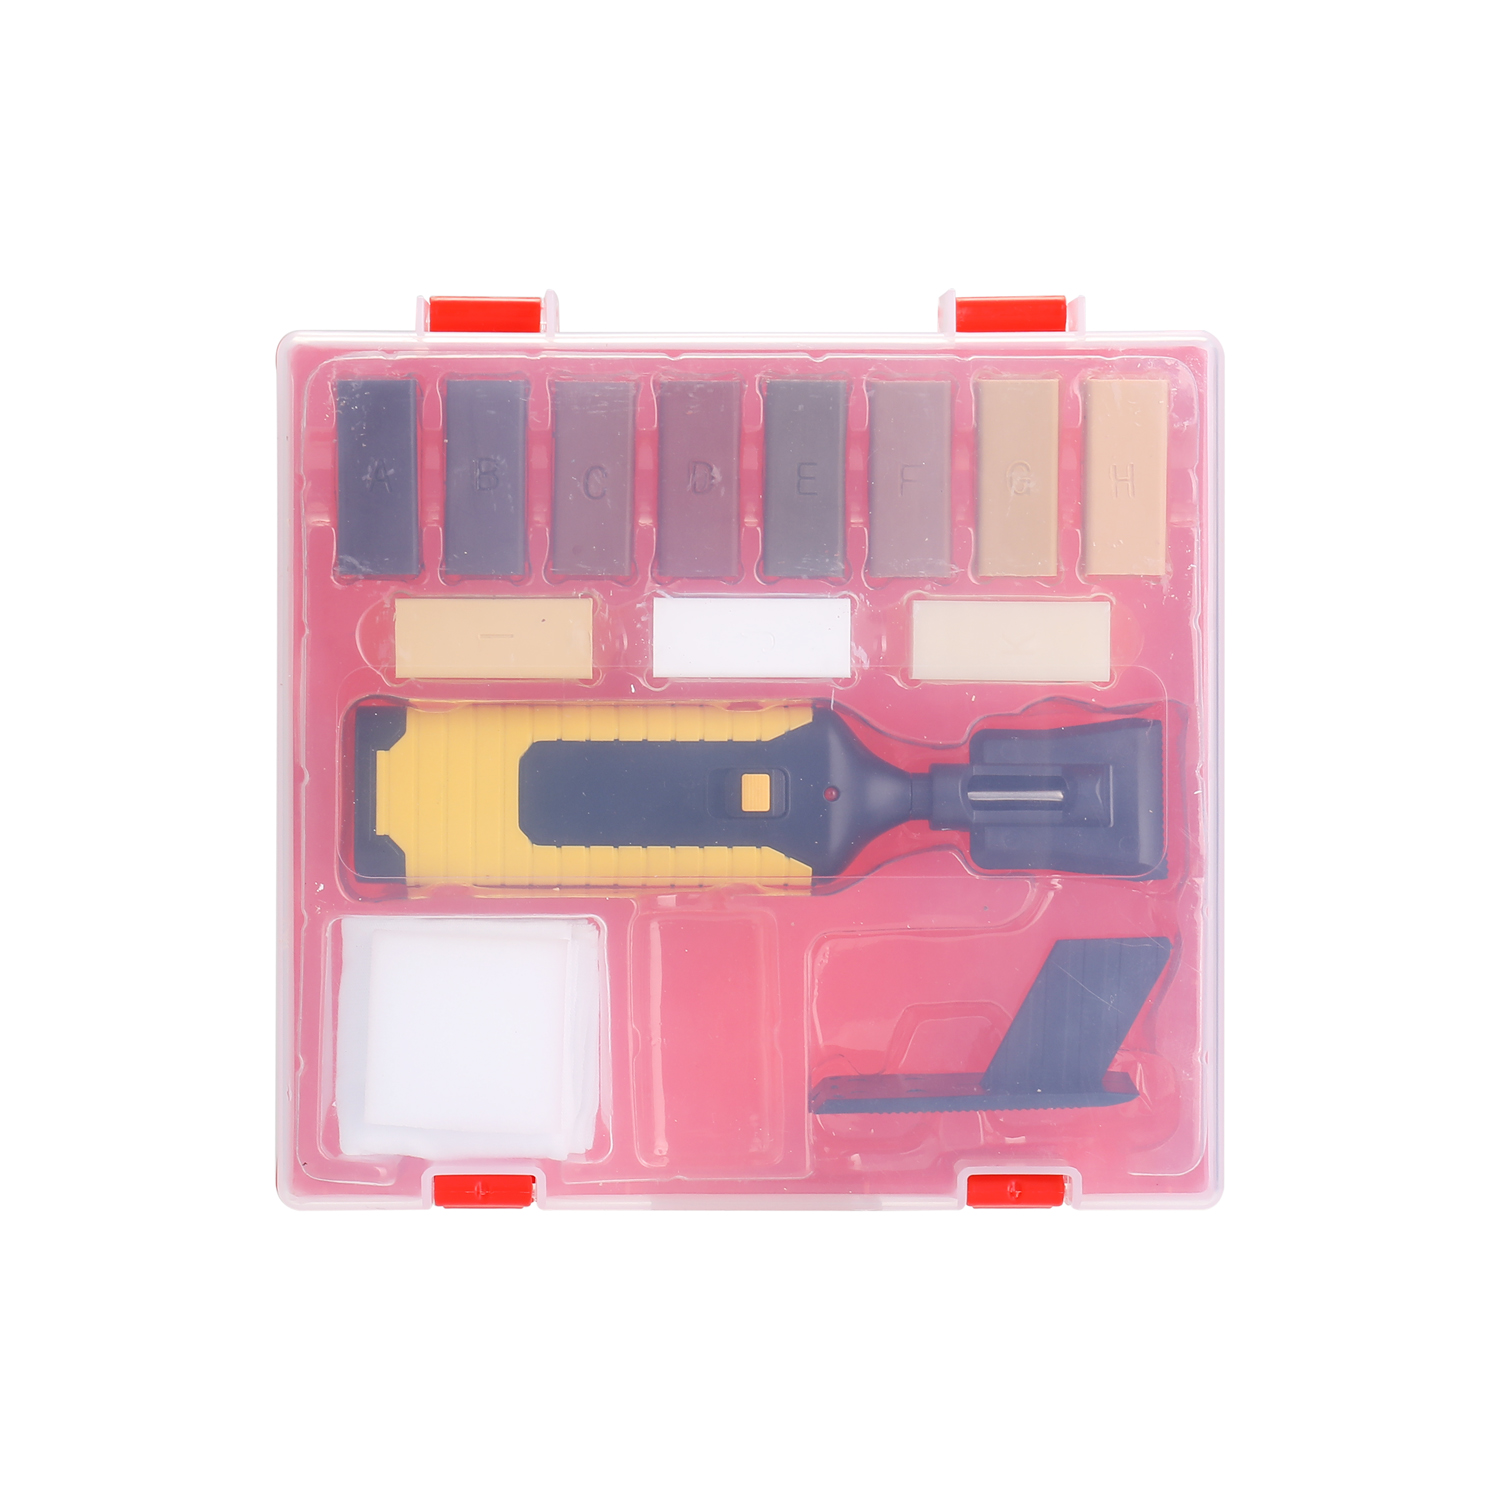 Hand Repairing Kit Hand Machine ax System Floor Worktop Sturdy Casing Chips Scratches Mending lamination Tool Set With Tool Box